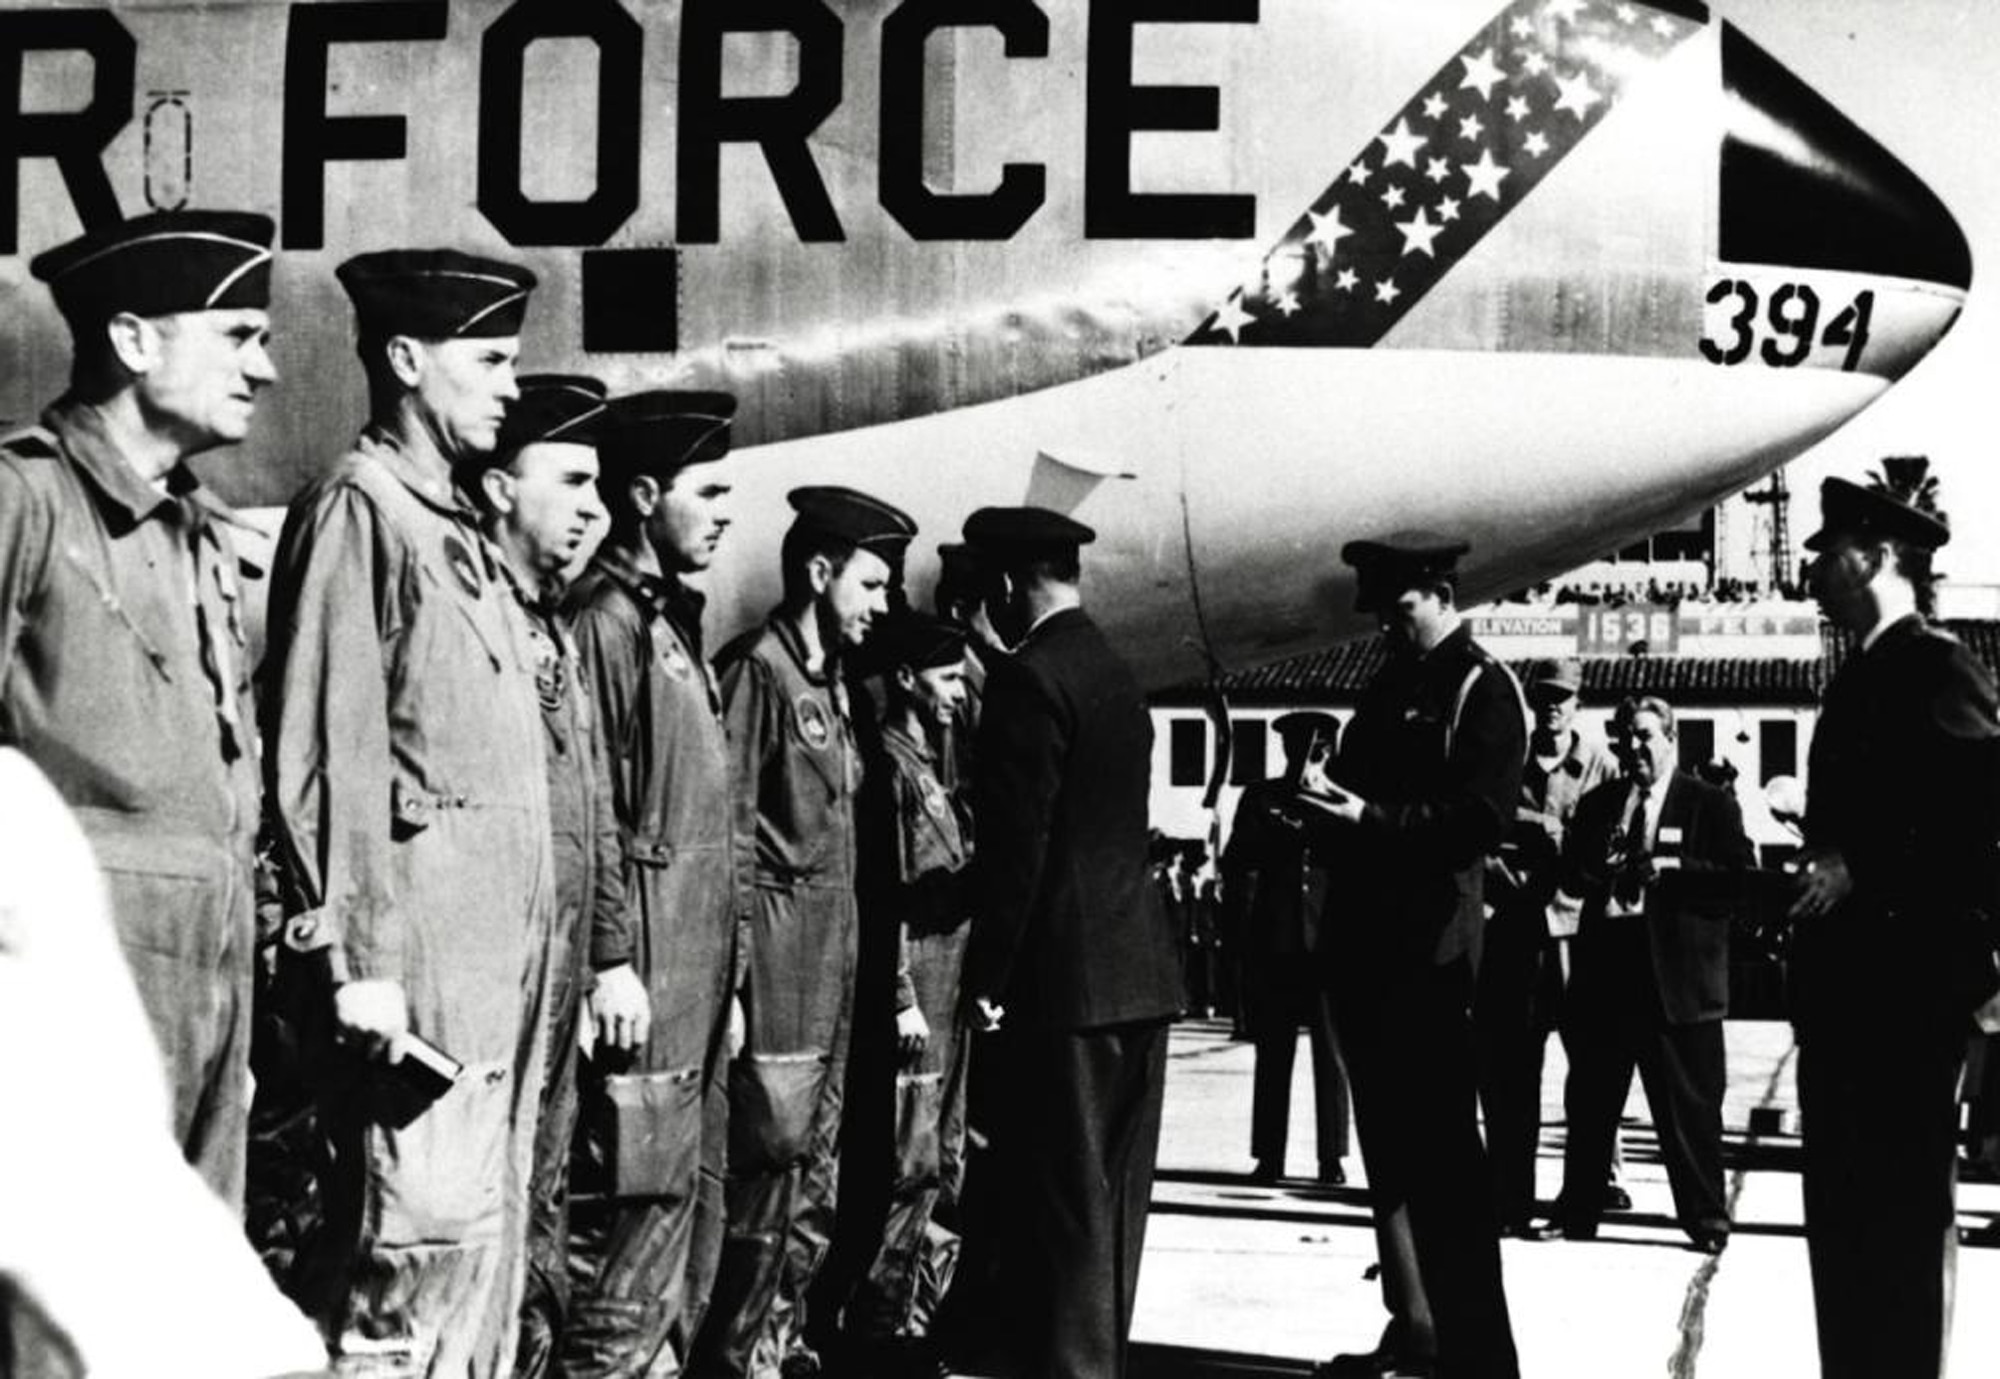 During a ceremony at March AFB, Calif., on Jan. 18, 1957, Gen. Curtis E. LeMay presents the Distinguished Flying Cross to the crew of Lucky Lady III.  At far left is Maj. Gen. Archie J. Old Jr., Fifteenth Air Force commander.  The aide behind General Lemay is Maj. David C. Jones, later to become Air Force chief of staff and chairman of the joint chiefs.